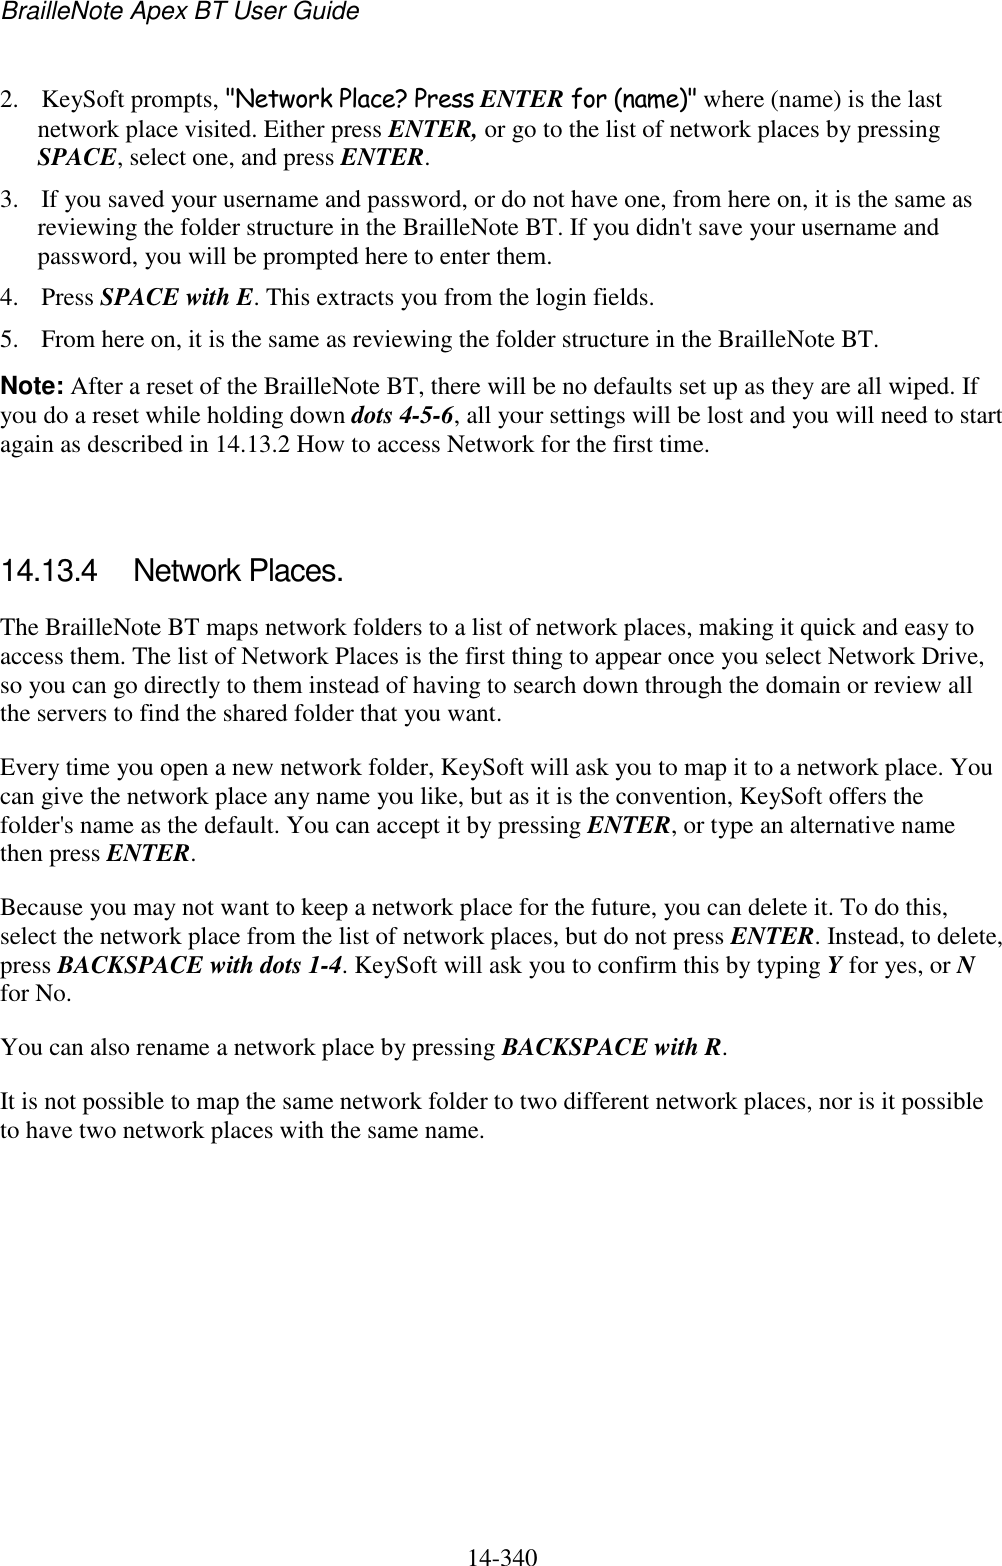 BrailleNote Apex BT User Guide   14-340   2. KeySoft prompts, &quot;Network Place? Press ENTER for (name)&quot; where (name) is the last network place visited. Either press ENTER, or go to the list of network places by pressing SPACE, select one, and press ENTER. 3. If you saved your username and password, or do not have one, from here on, it is the same as reviewing the folder structure in the BrailleNote BT. If you didn&apos;t save your username and password, you will be prompted here to enter them. 4. Press SPACE with E. This extracts you from the login fields. 5. From here on, it is the same as reviewing the folder structure in the BrailleNote BT. Note: After a reset of the BrailleNote BT, there will be no defaults set up as they are all wiped. If you do a reset while holding down dots 4-5-6, all your settings will be lost and you will need to start again as described in 14.13.2 How to access Network for the first time.   14.13.4  Network Places. The BrailleNote BT maps network folders to a list of network places, making it quick and easy to access them. The list of Network Places is the first thing to appear once you select Network Drive, so you can go directly to them instead of having to search down through the domain or review all the servers to find the shared folder that you want. Every time you open a new network folder, KeySoft will ask you to map it to a network place. You can give the network place any name you like, but as it is the convention, KeySoft offers the folder&apos;s name as the default. You can accept it by pressing ENTER, or type an alternative name then press ENTER. Because you may not want to keep a network place for the future, you can delete it. To do this, select the network place from the list of network places, but do not press ENTER. Instead, to delete, press BACKSPACE with dots 1-4. KeySoft will ask you to confirm this by typing Y for yes, or N for No. You can also rename a network place by pressing BACKSPACE with R. It is not possible to map the same network folder to two different network places, nor is it possible to have two network places with the same name.   